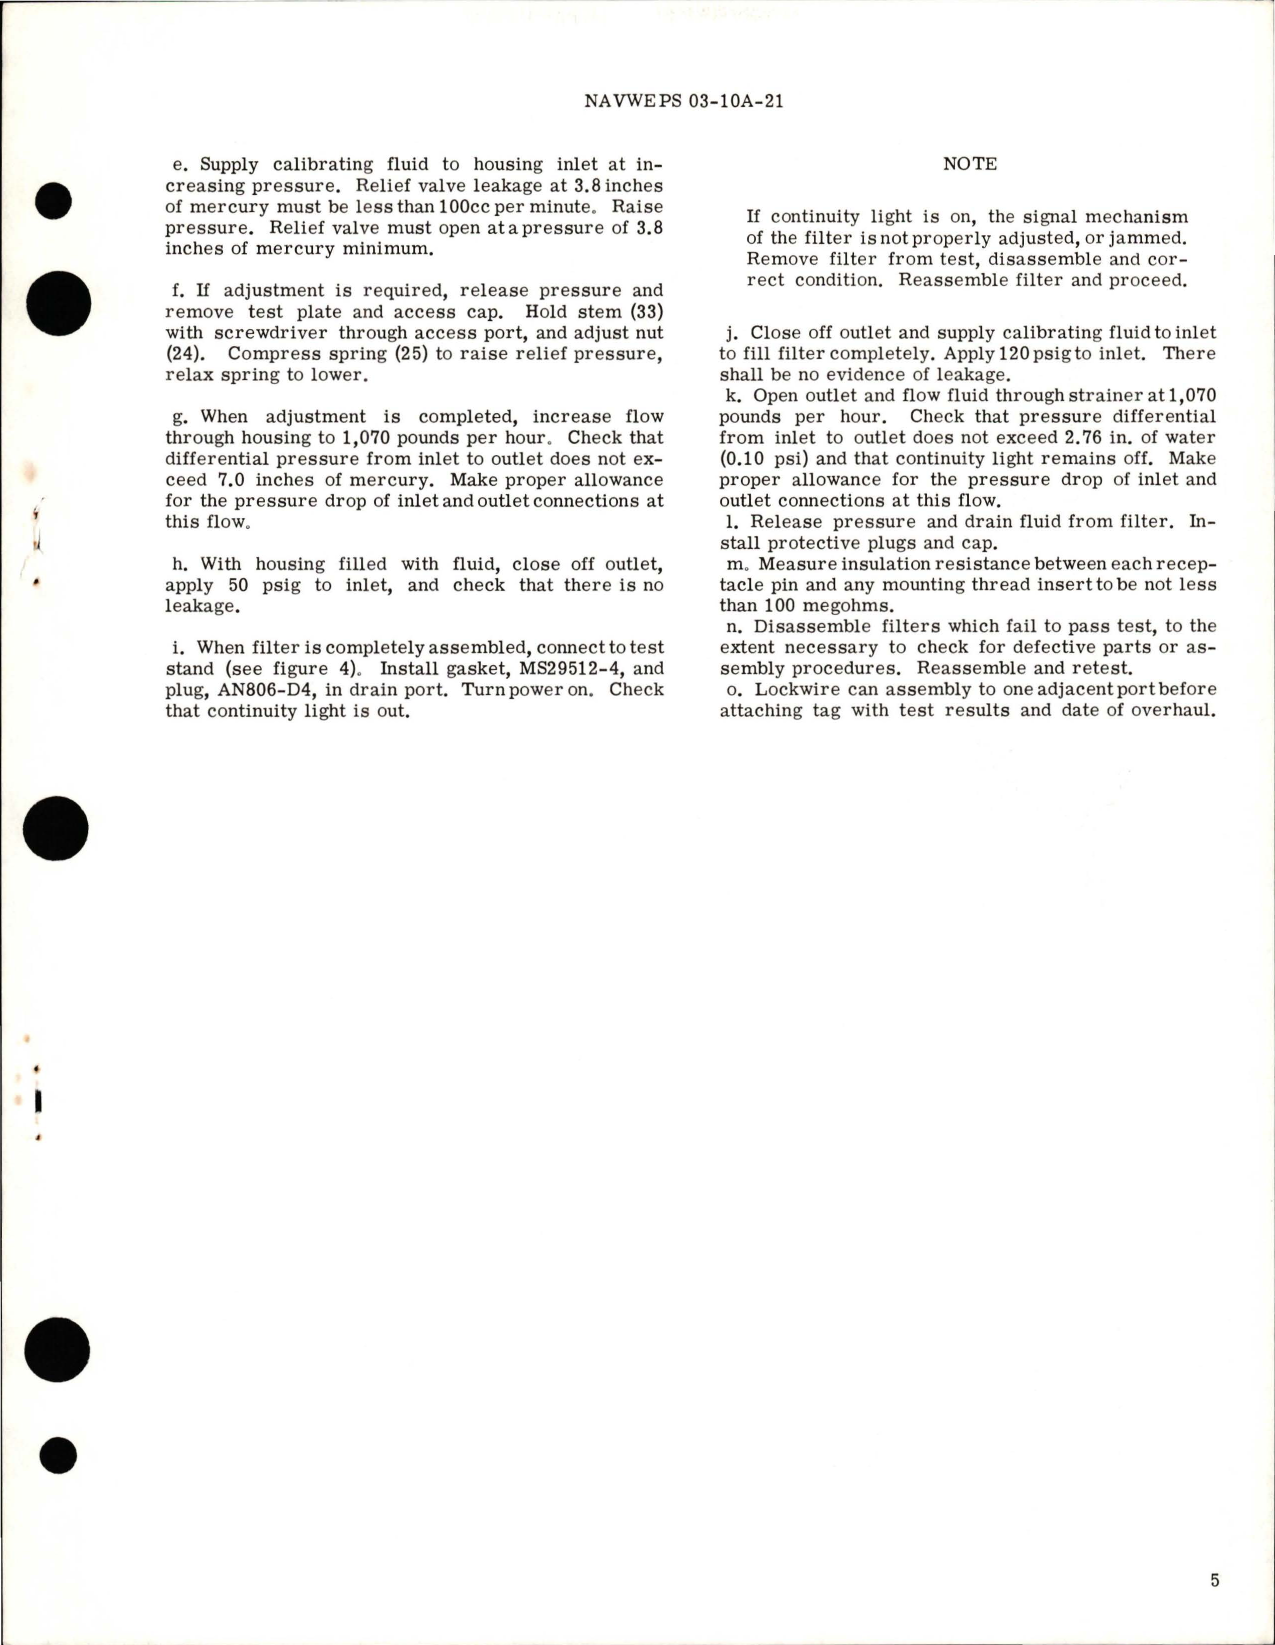 Sample page 5 from AirCorps Library document: Overhaul Instructions with Parts Breakdown for Fuel Filter - Part 52-2145-009